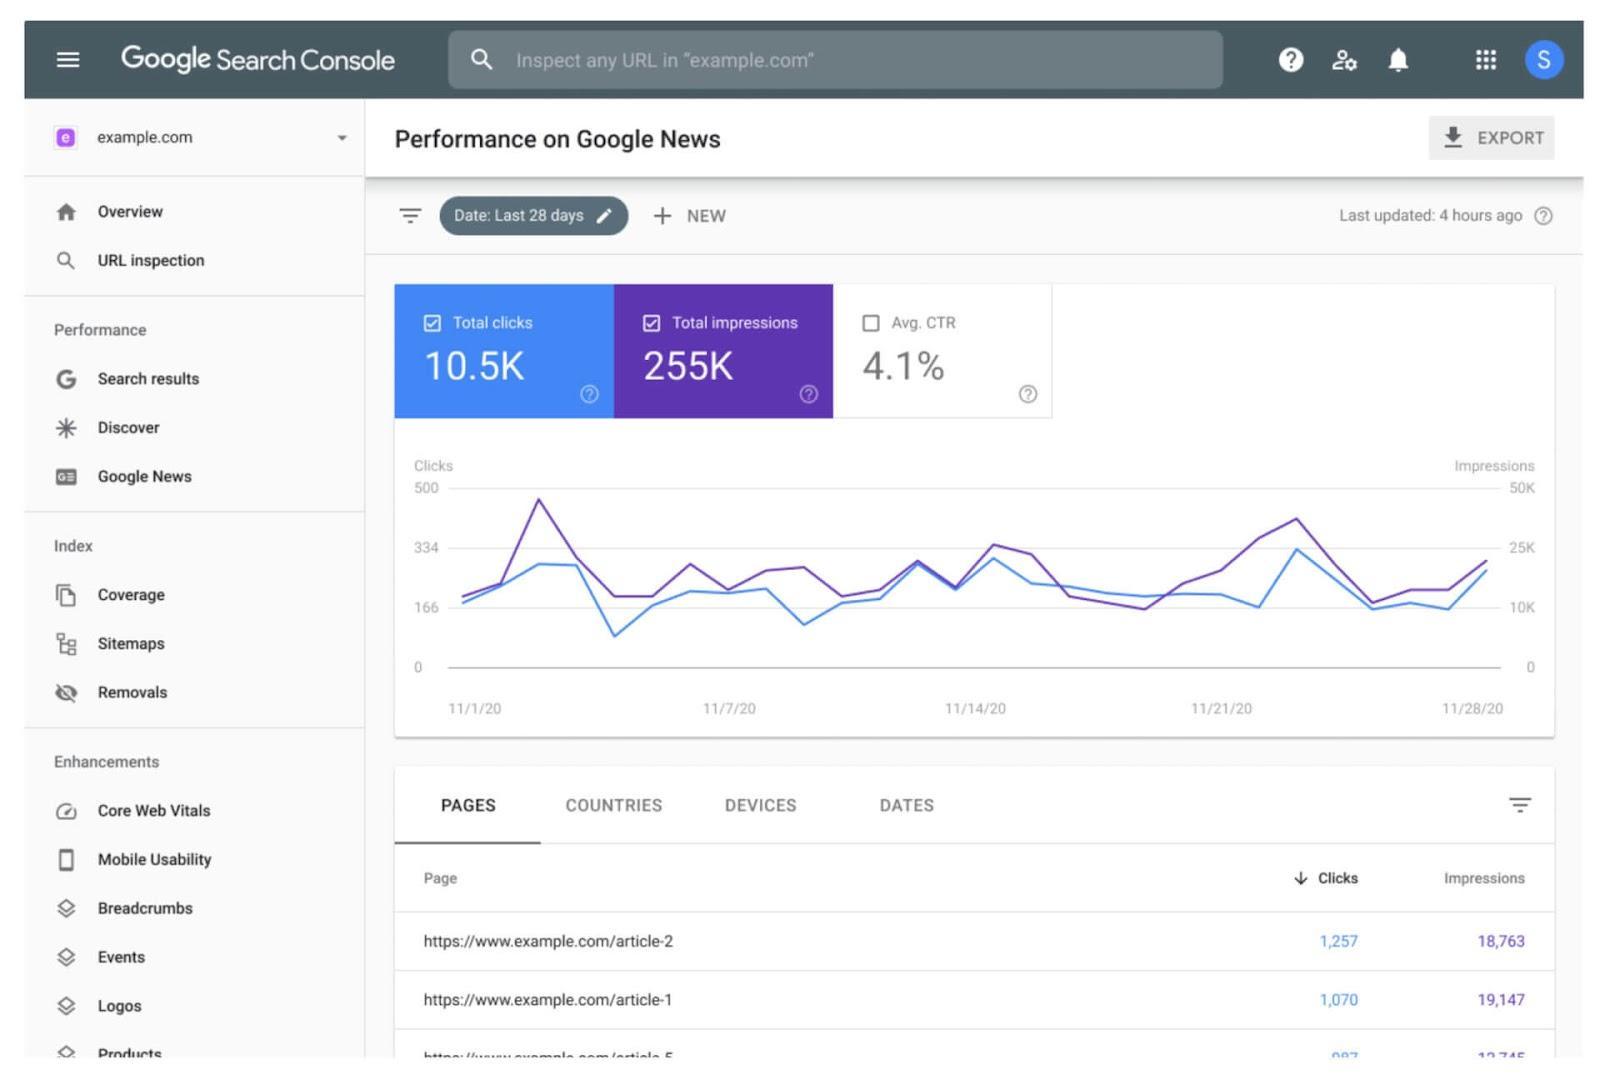 Google search console allows the user to see the over health of their website 